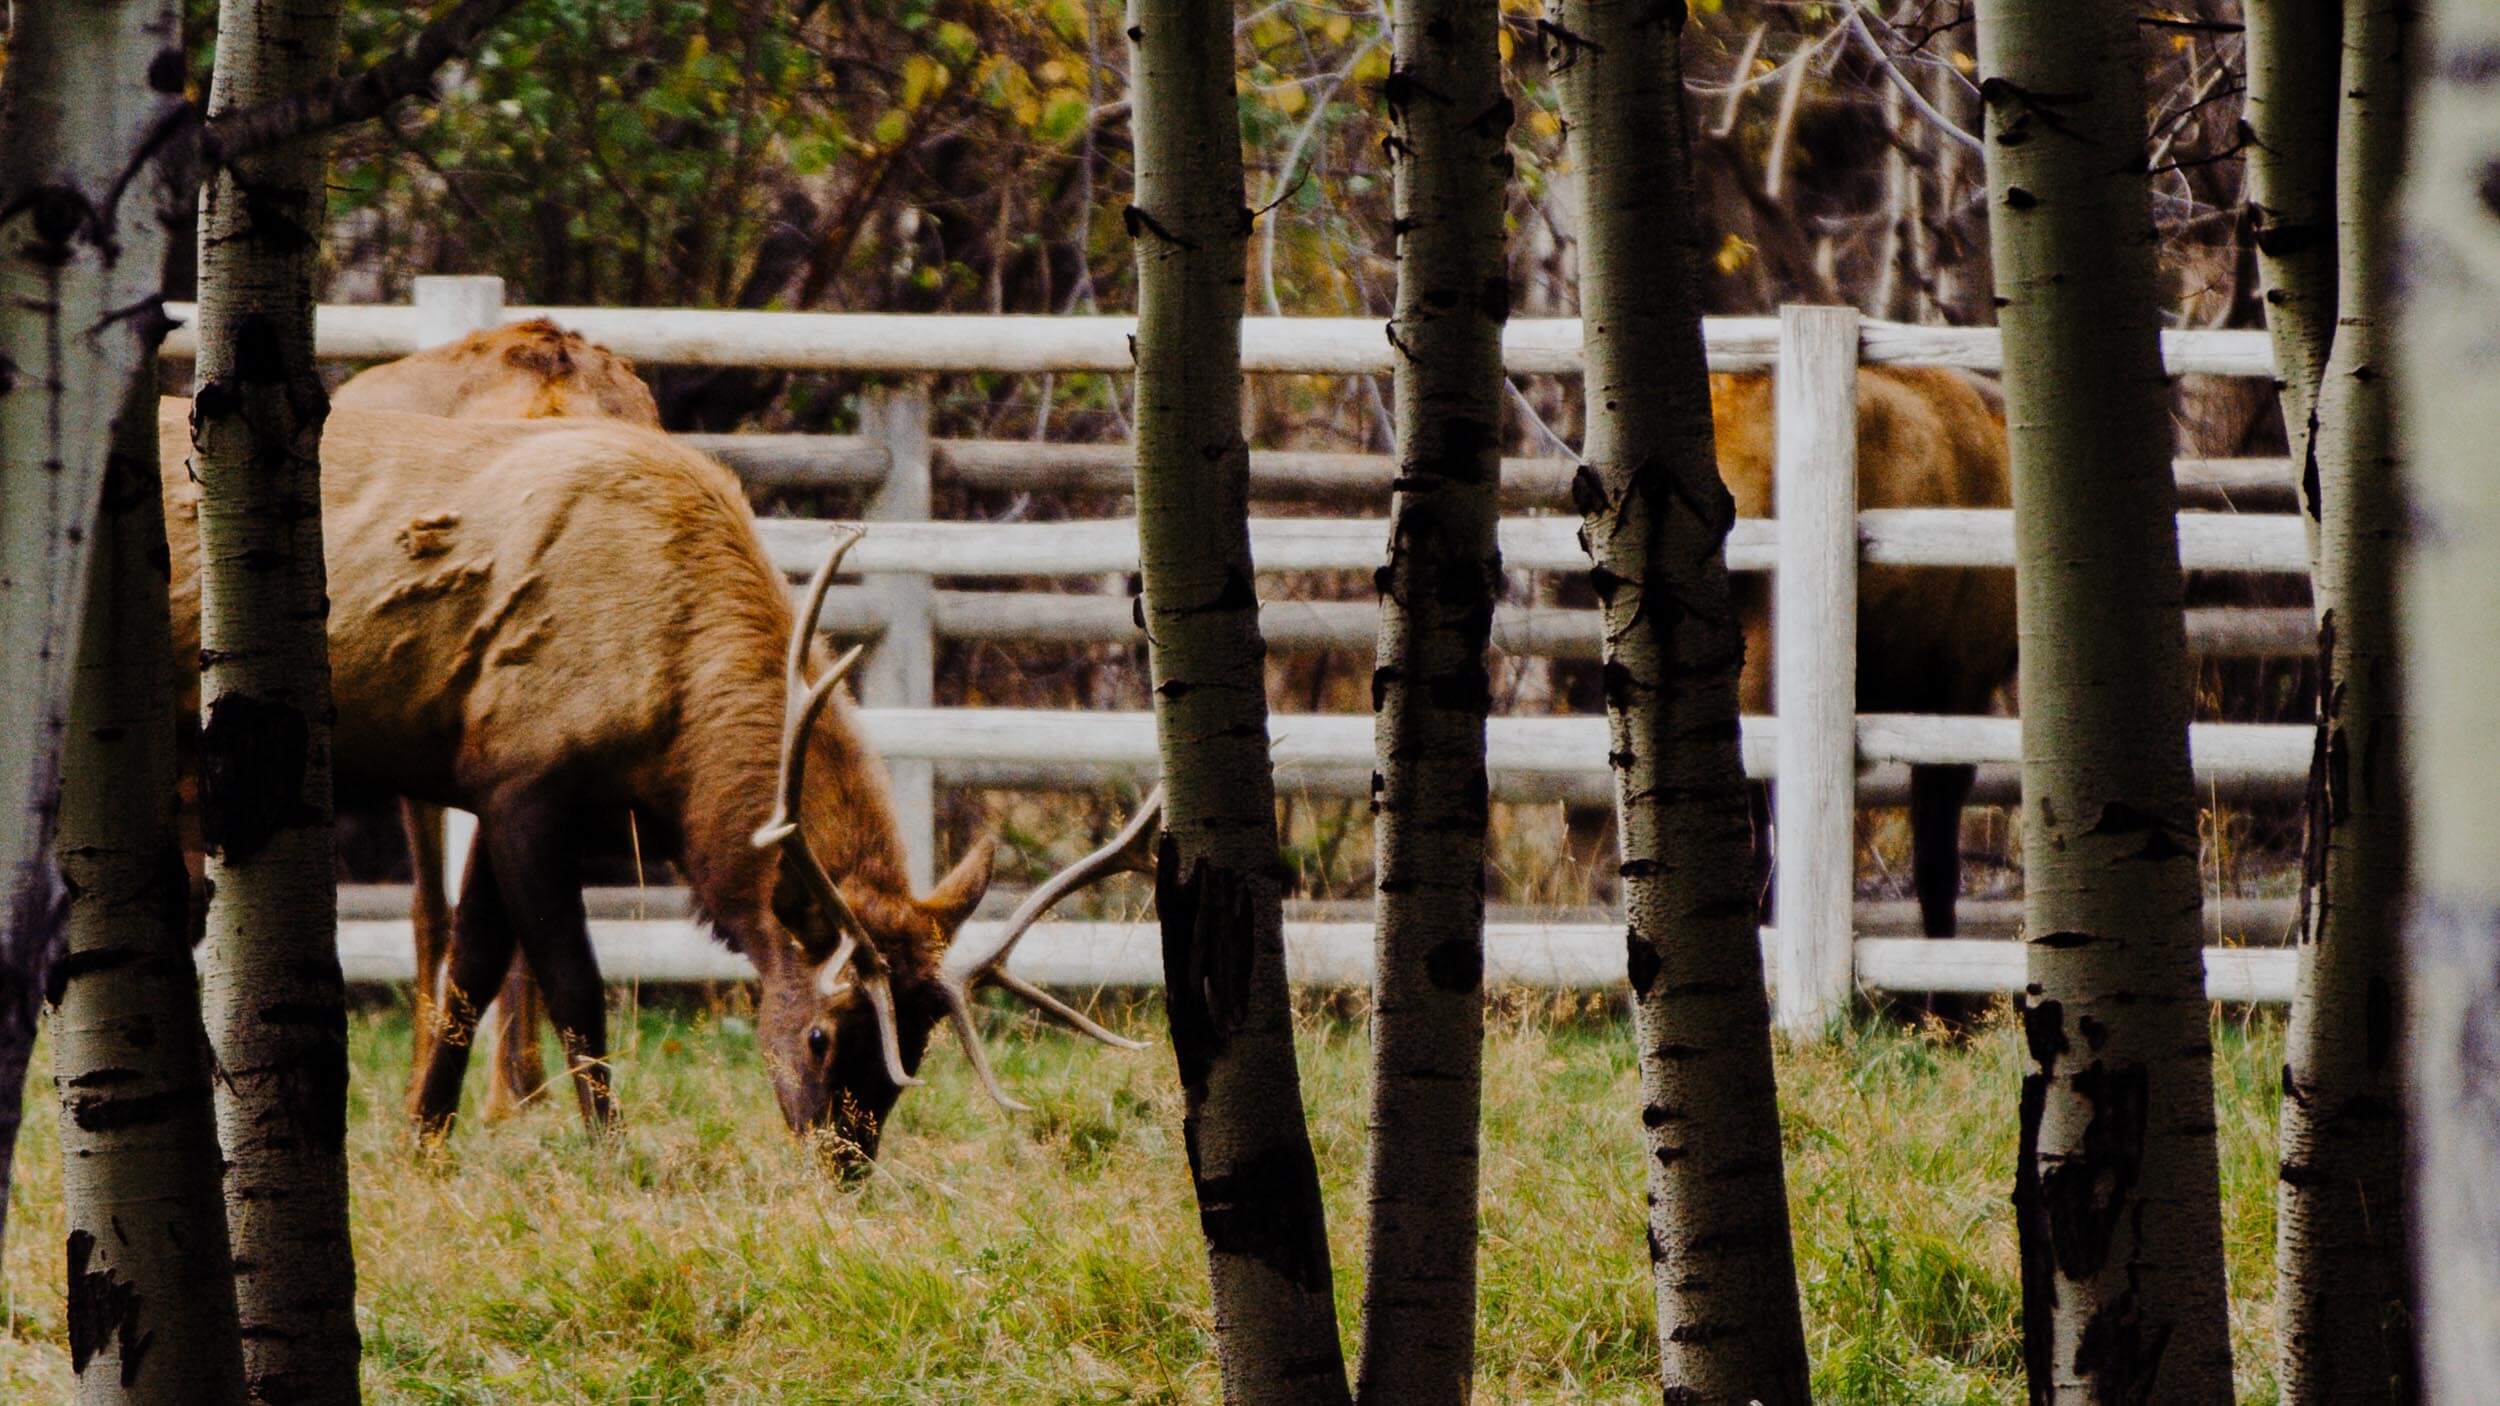 an elk eating grass beside a fence, surrounded by trees